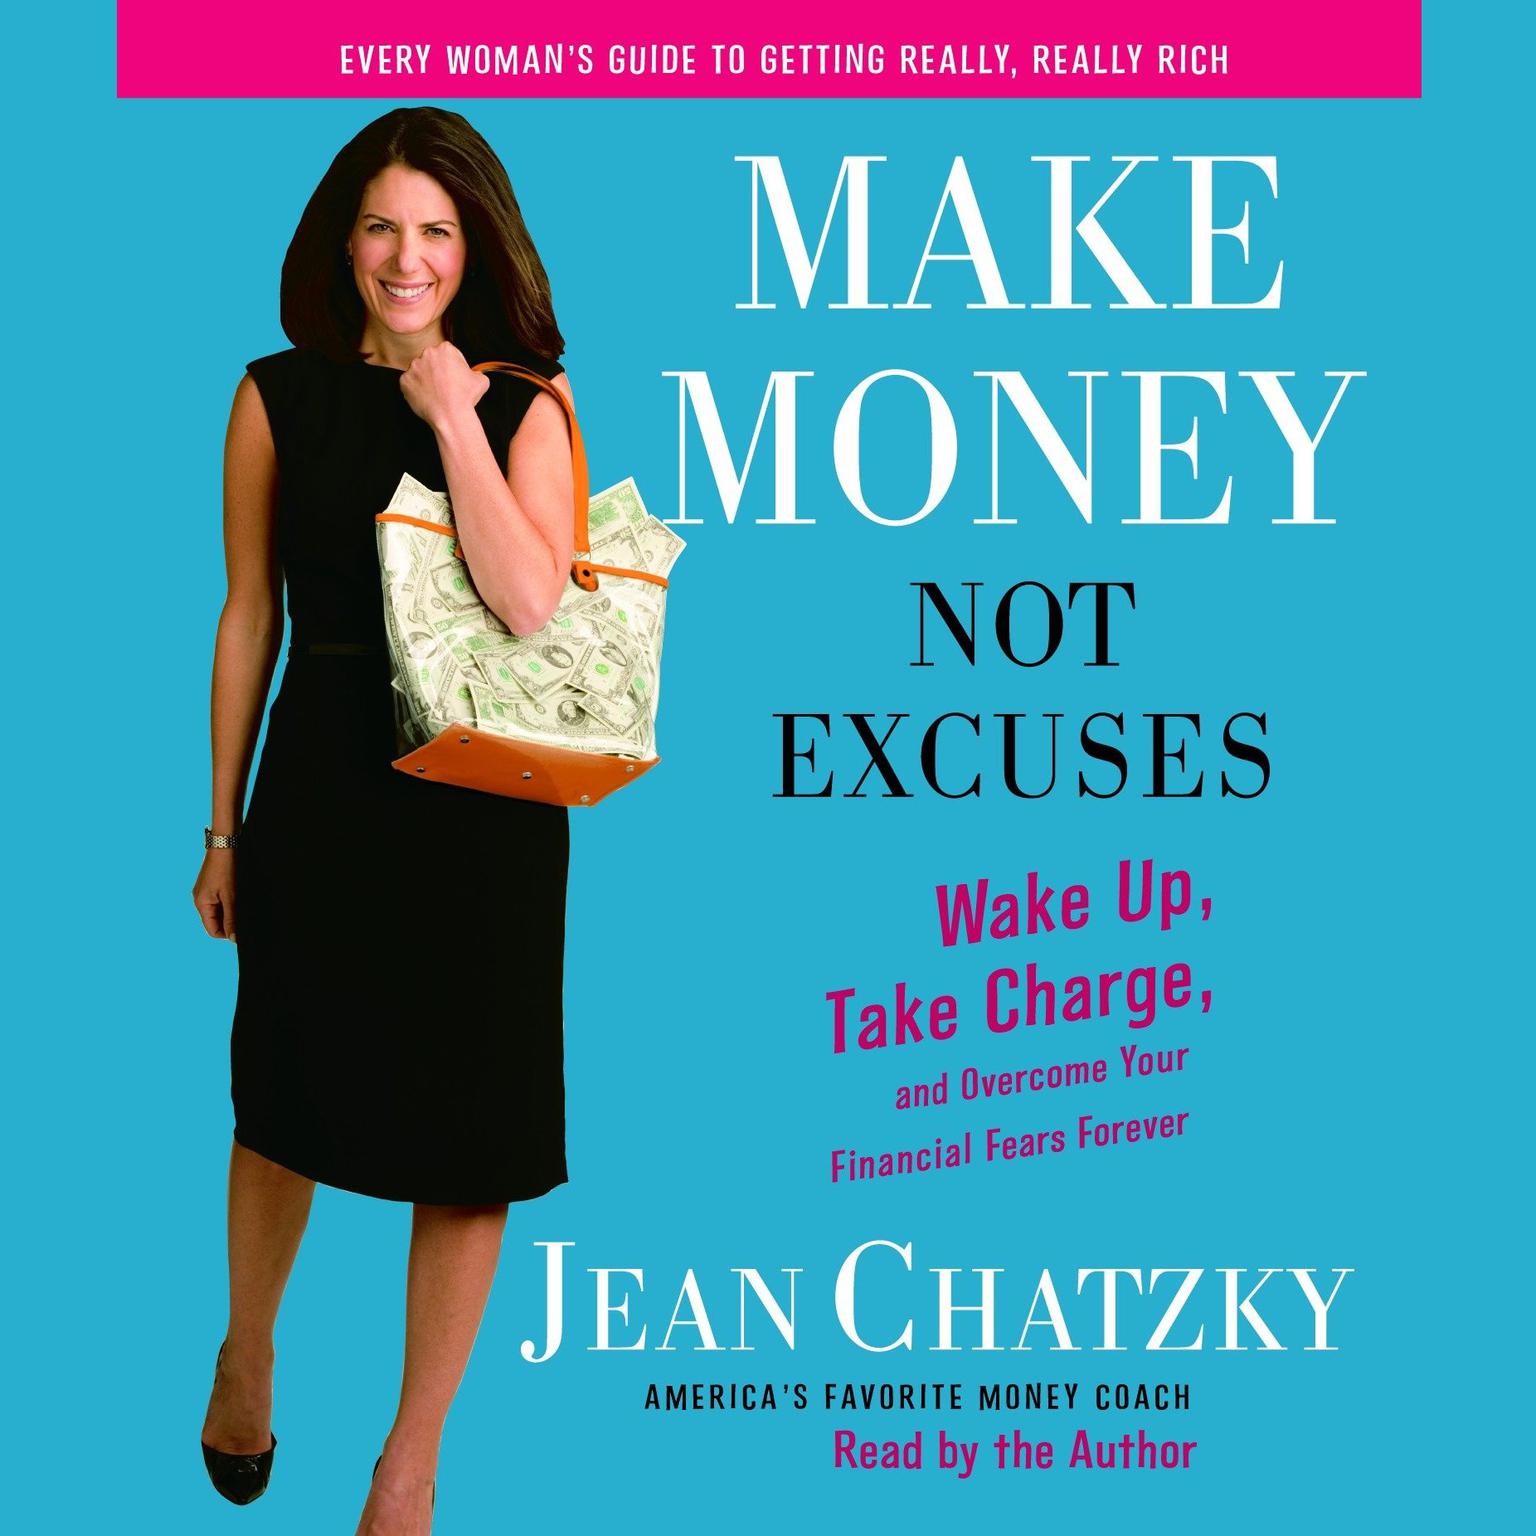 Make Money, Not Excuses (Abridged): Wake Up, Take Charge, and Overcome Your Financial Fears Forever Audiobook, by Jean Chatzky